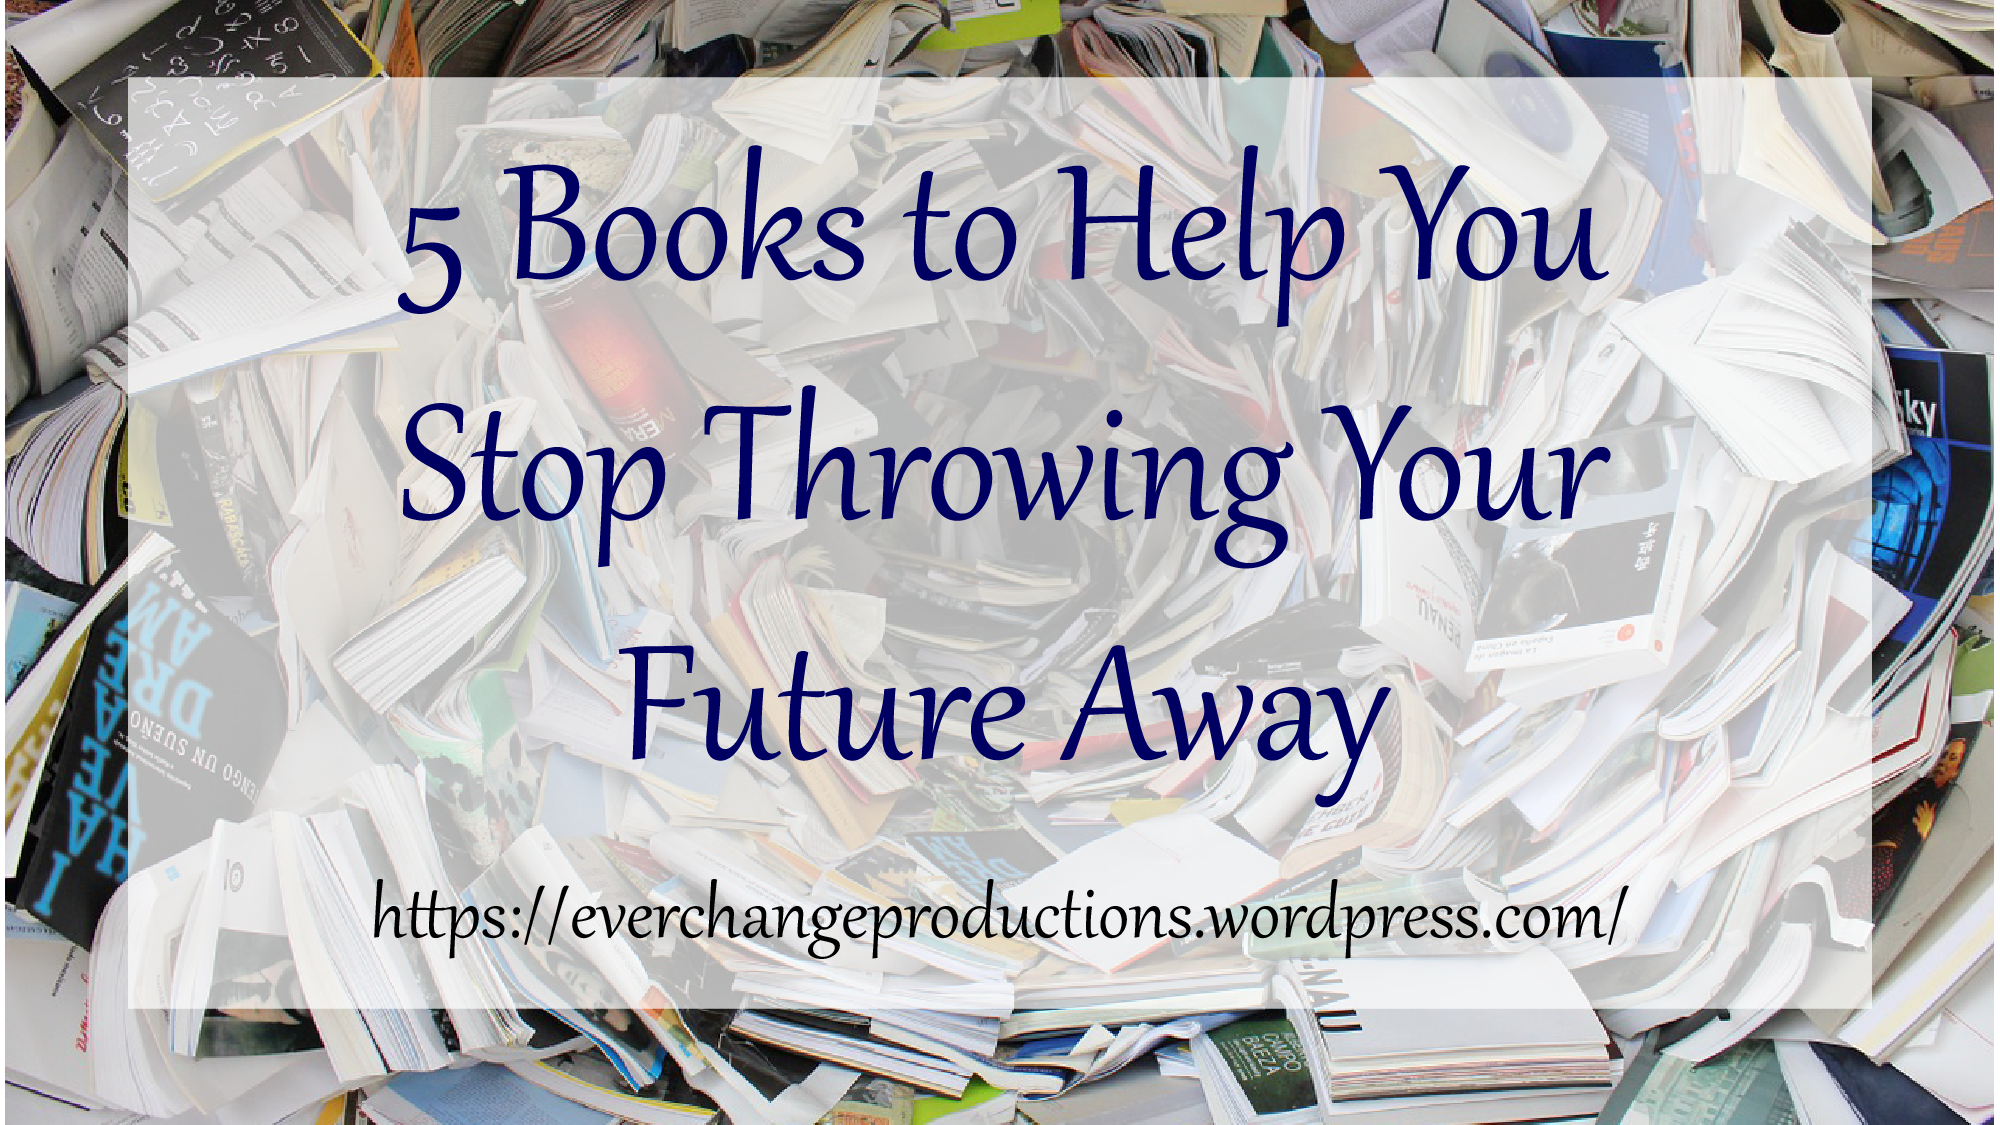 5 Books to Help You Stop Throwing Your Future Away